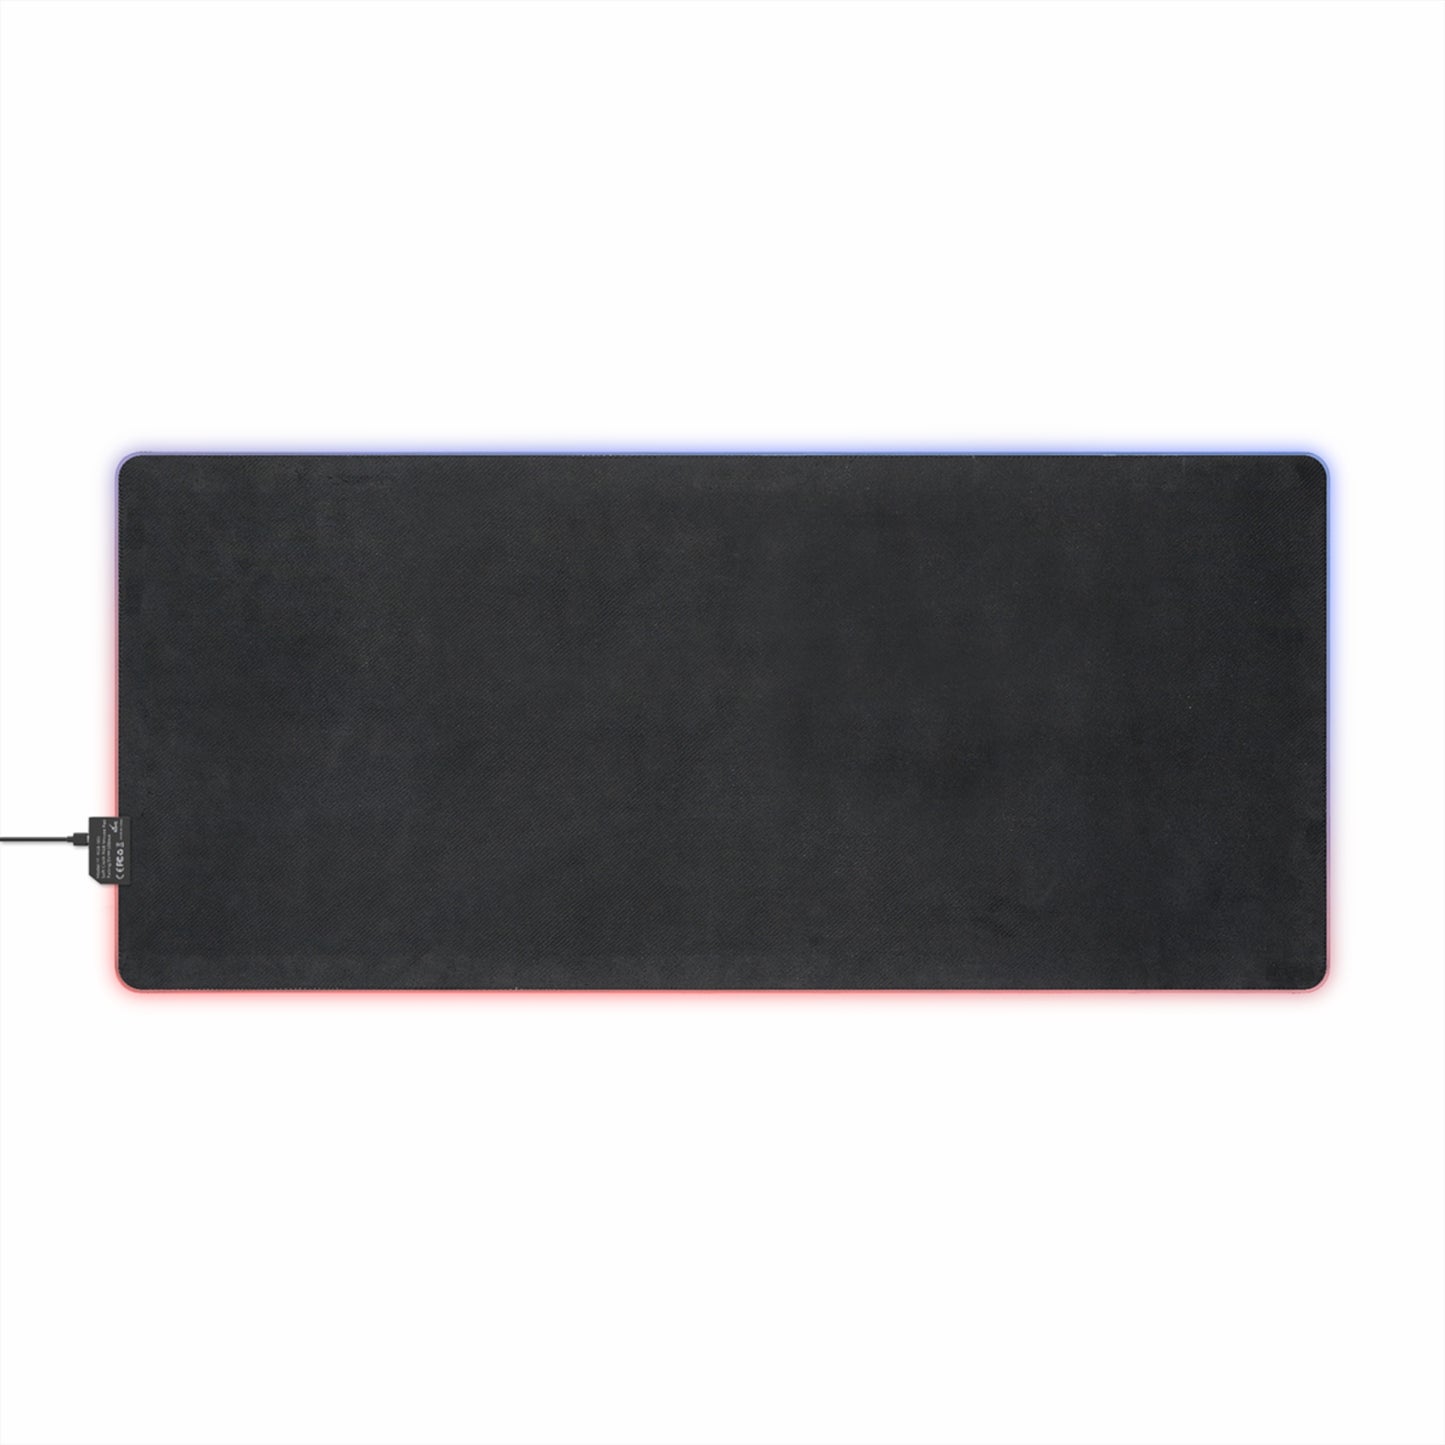 AG-12 LED Gaming Mouse Pad